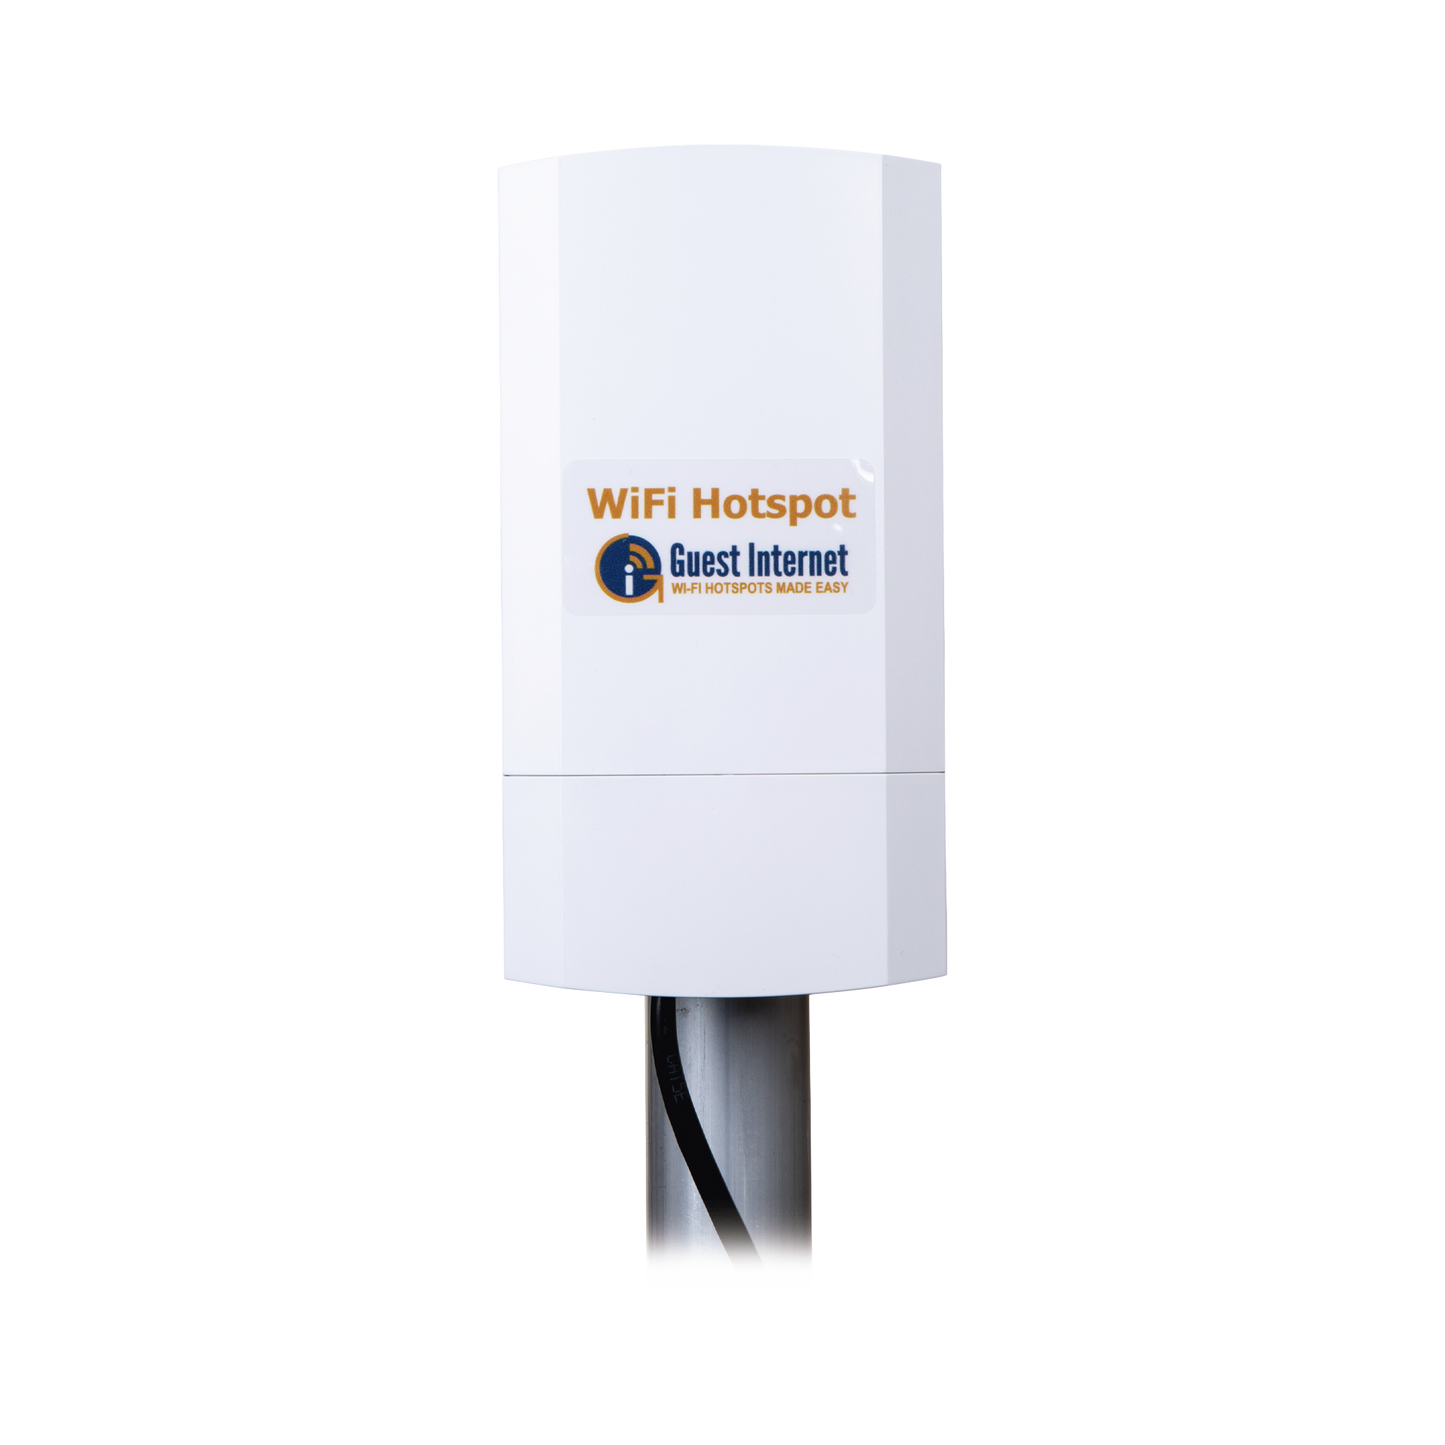 Wireless outdoor Wi-Fi hotspot ideal for token Internet (Micro Wisp) Quick, easy and secure setup